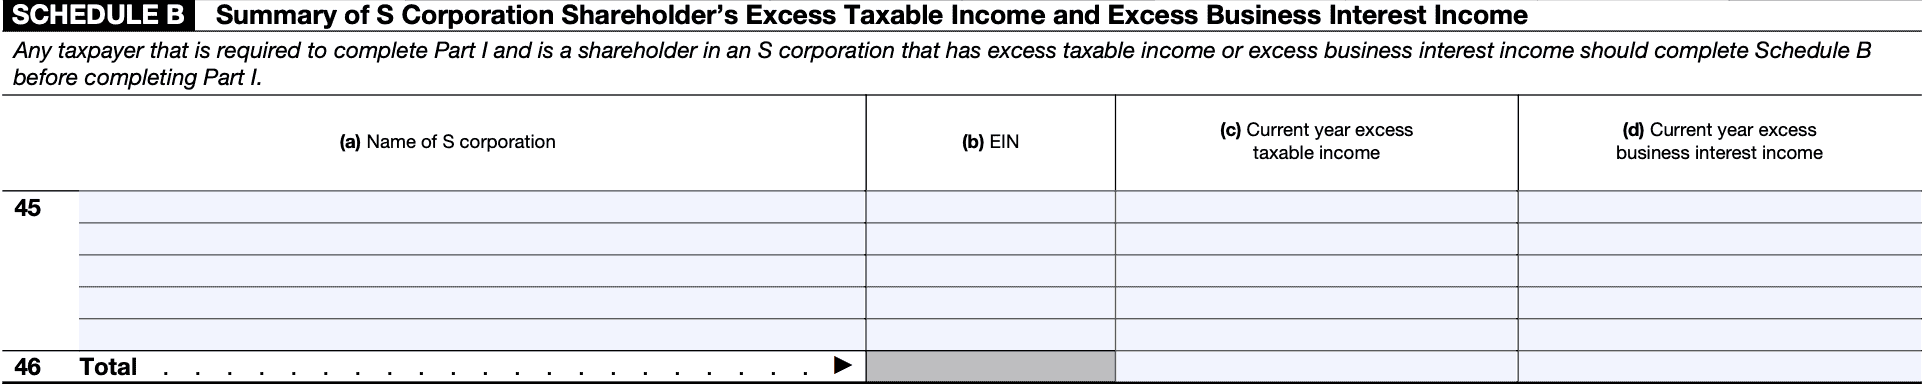 schedule b: summary of s corporation shareholder's excess taxable income and excess business interest income